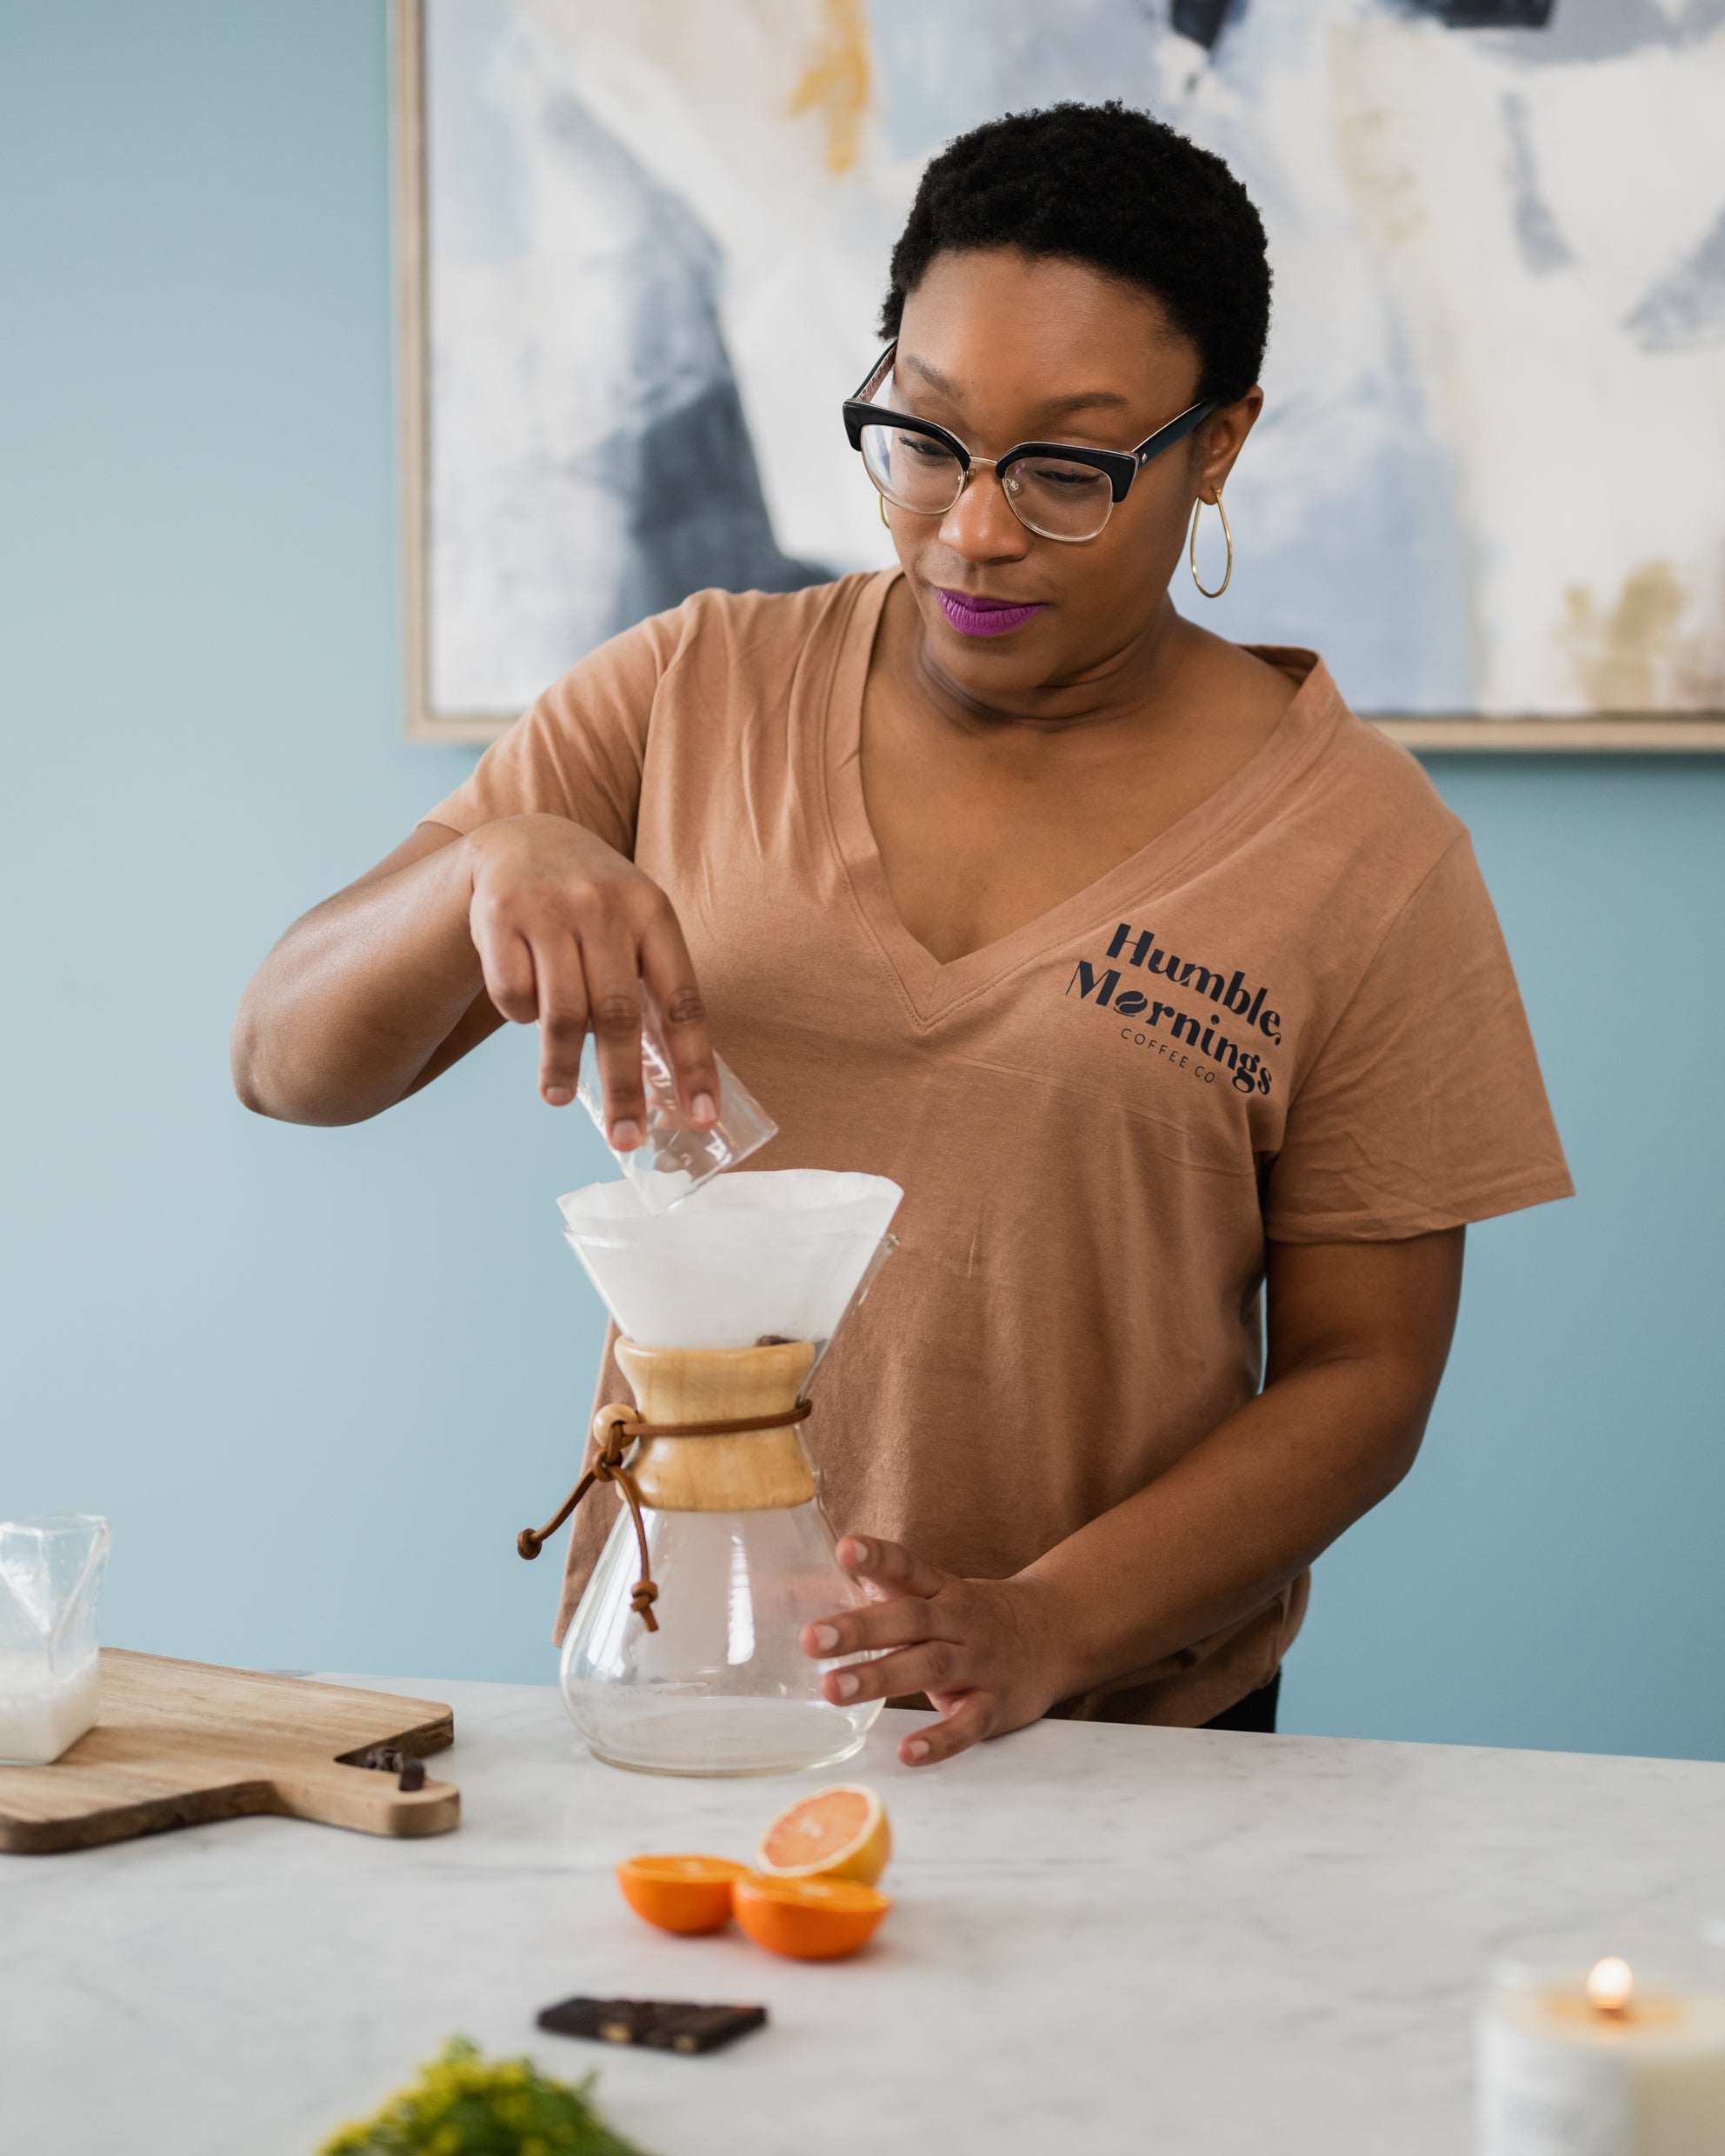 A woman pouring coffee into a coffee mug from a glass coffee maker.